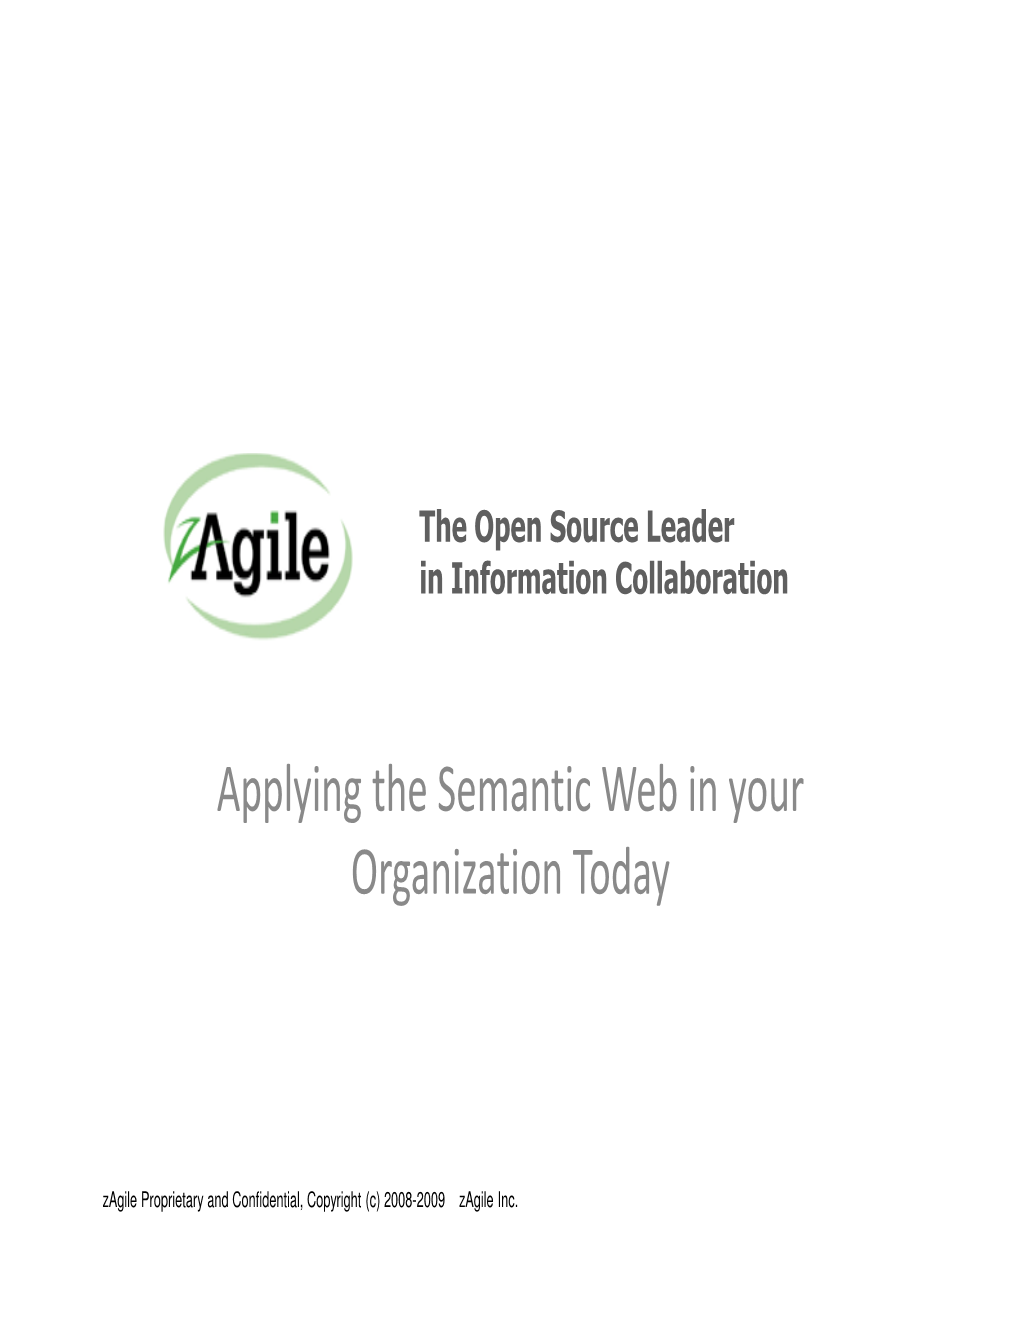 Applying the Semantic Web in Your Organization Today